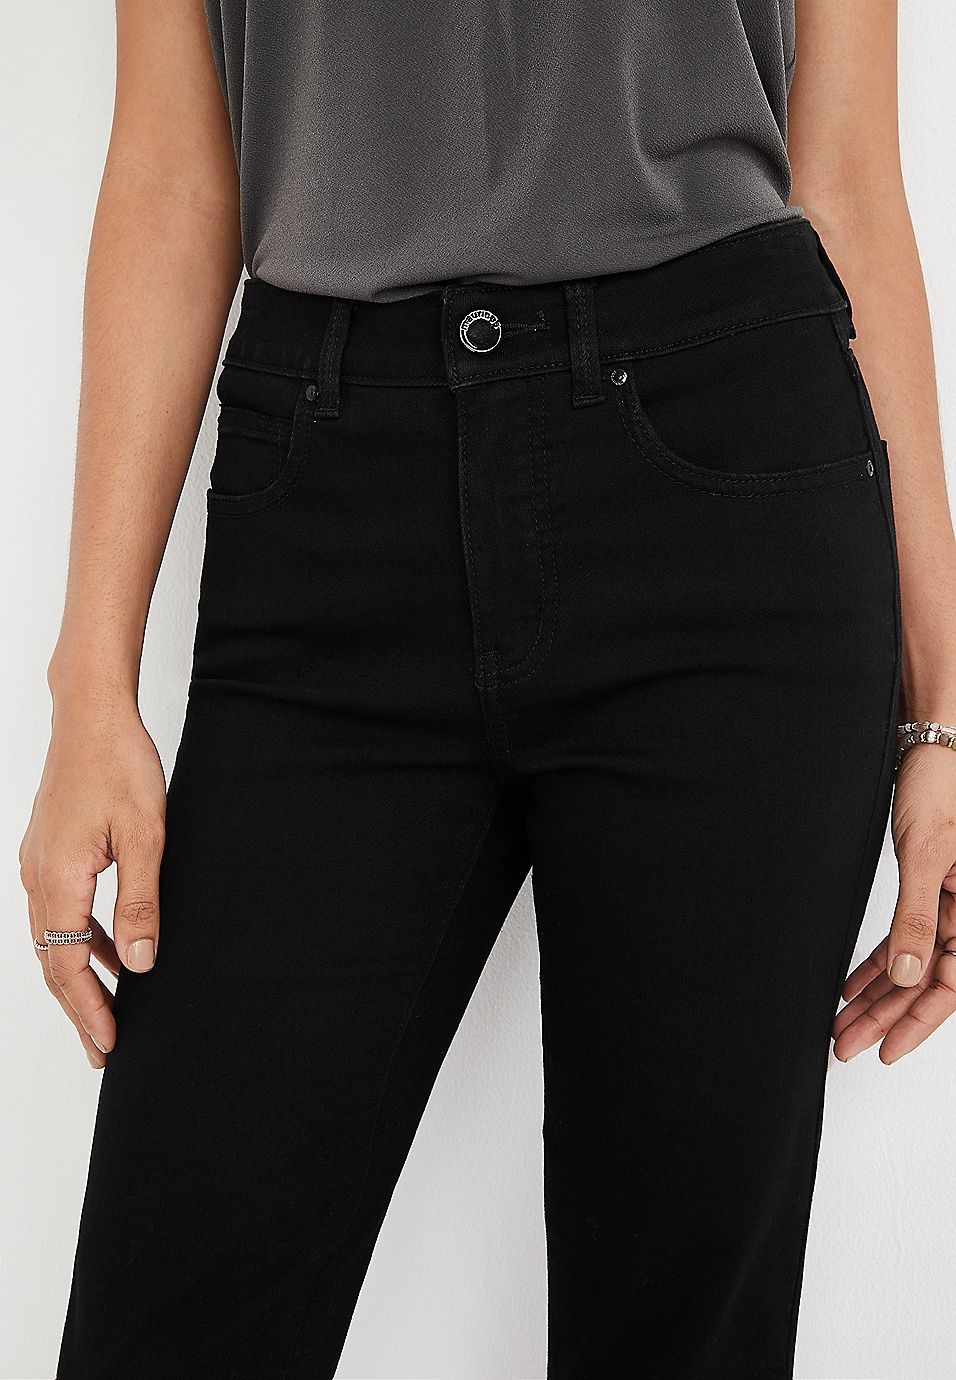 m jeans by maurices™ Everflex™ Straight High Rise Black Jean | Maurices